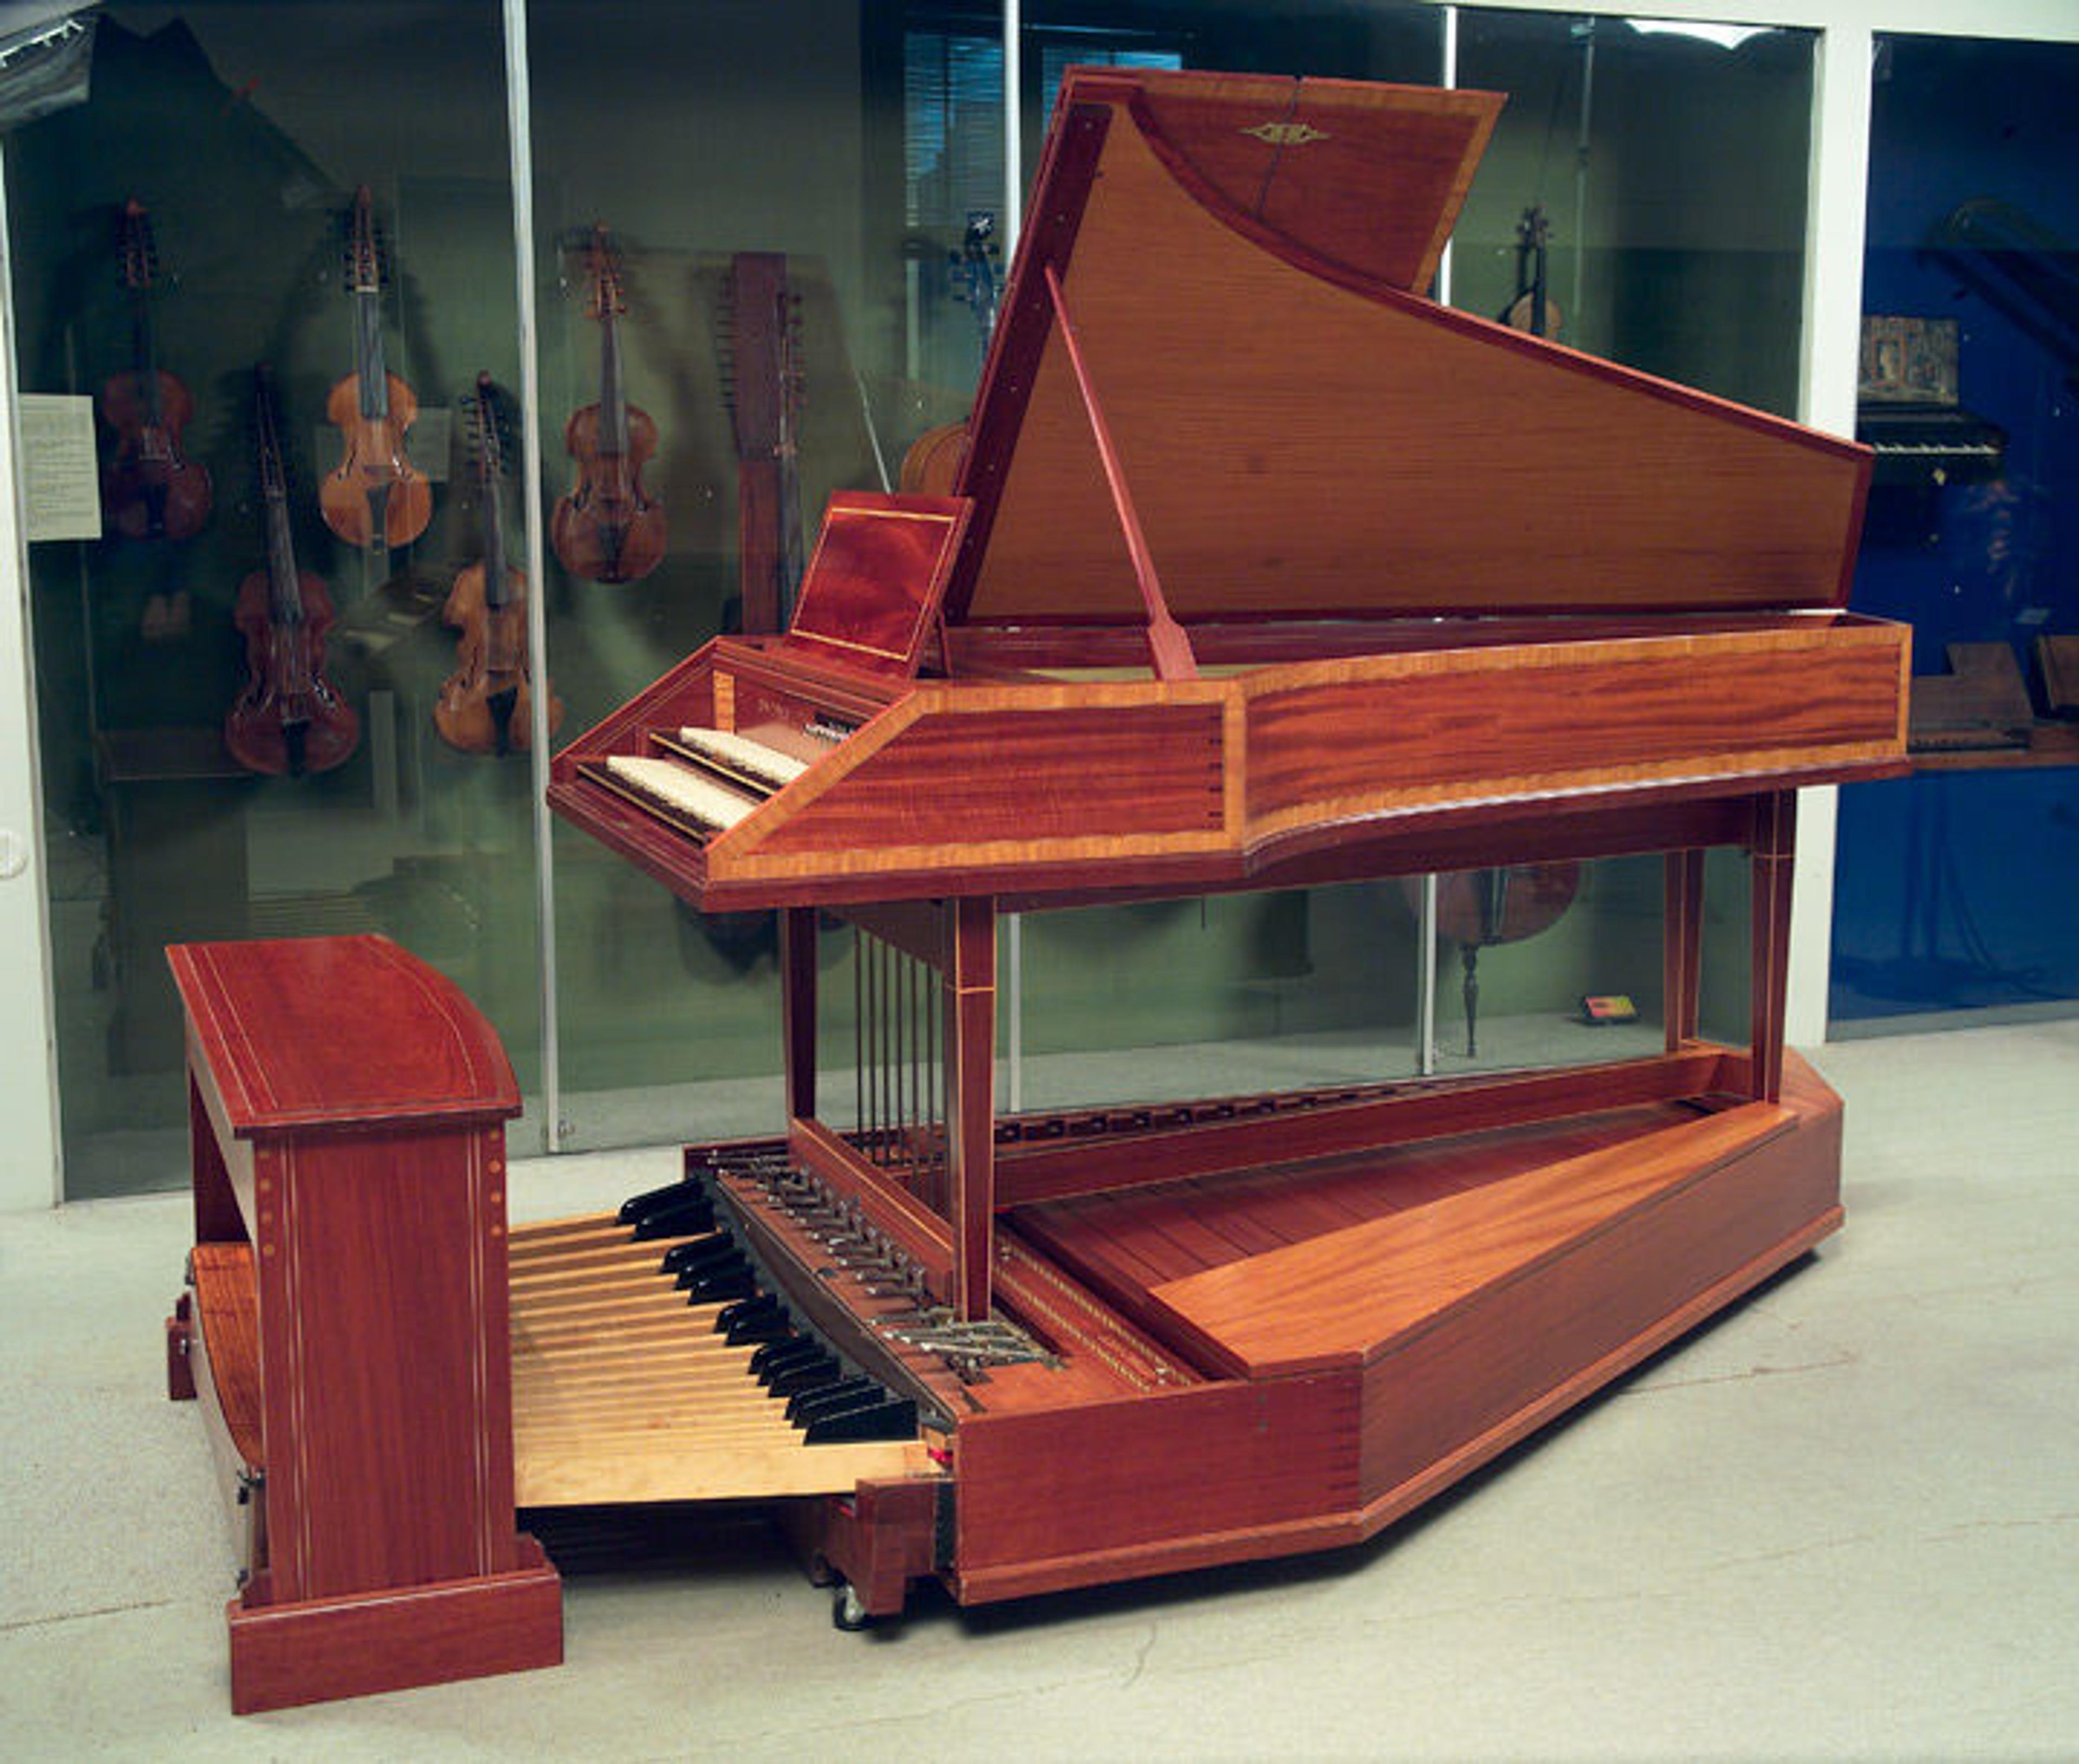 View of a pedal harpsichord in a gallery surrounded by an assortment of stringed instruments